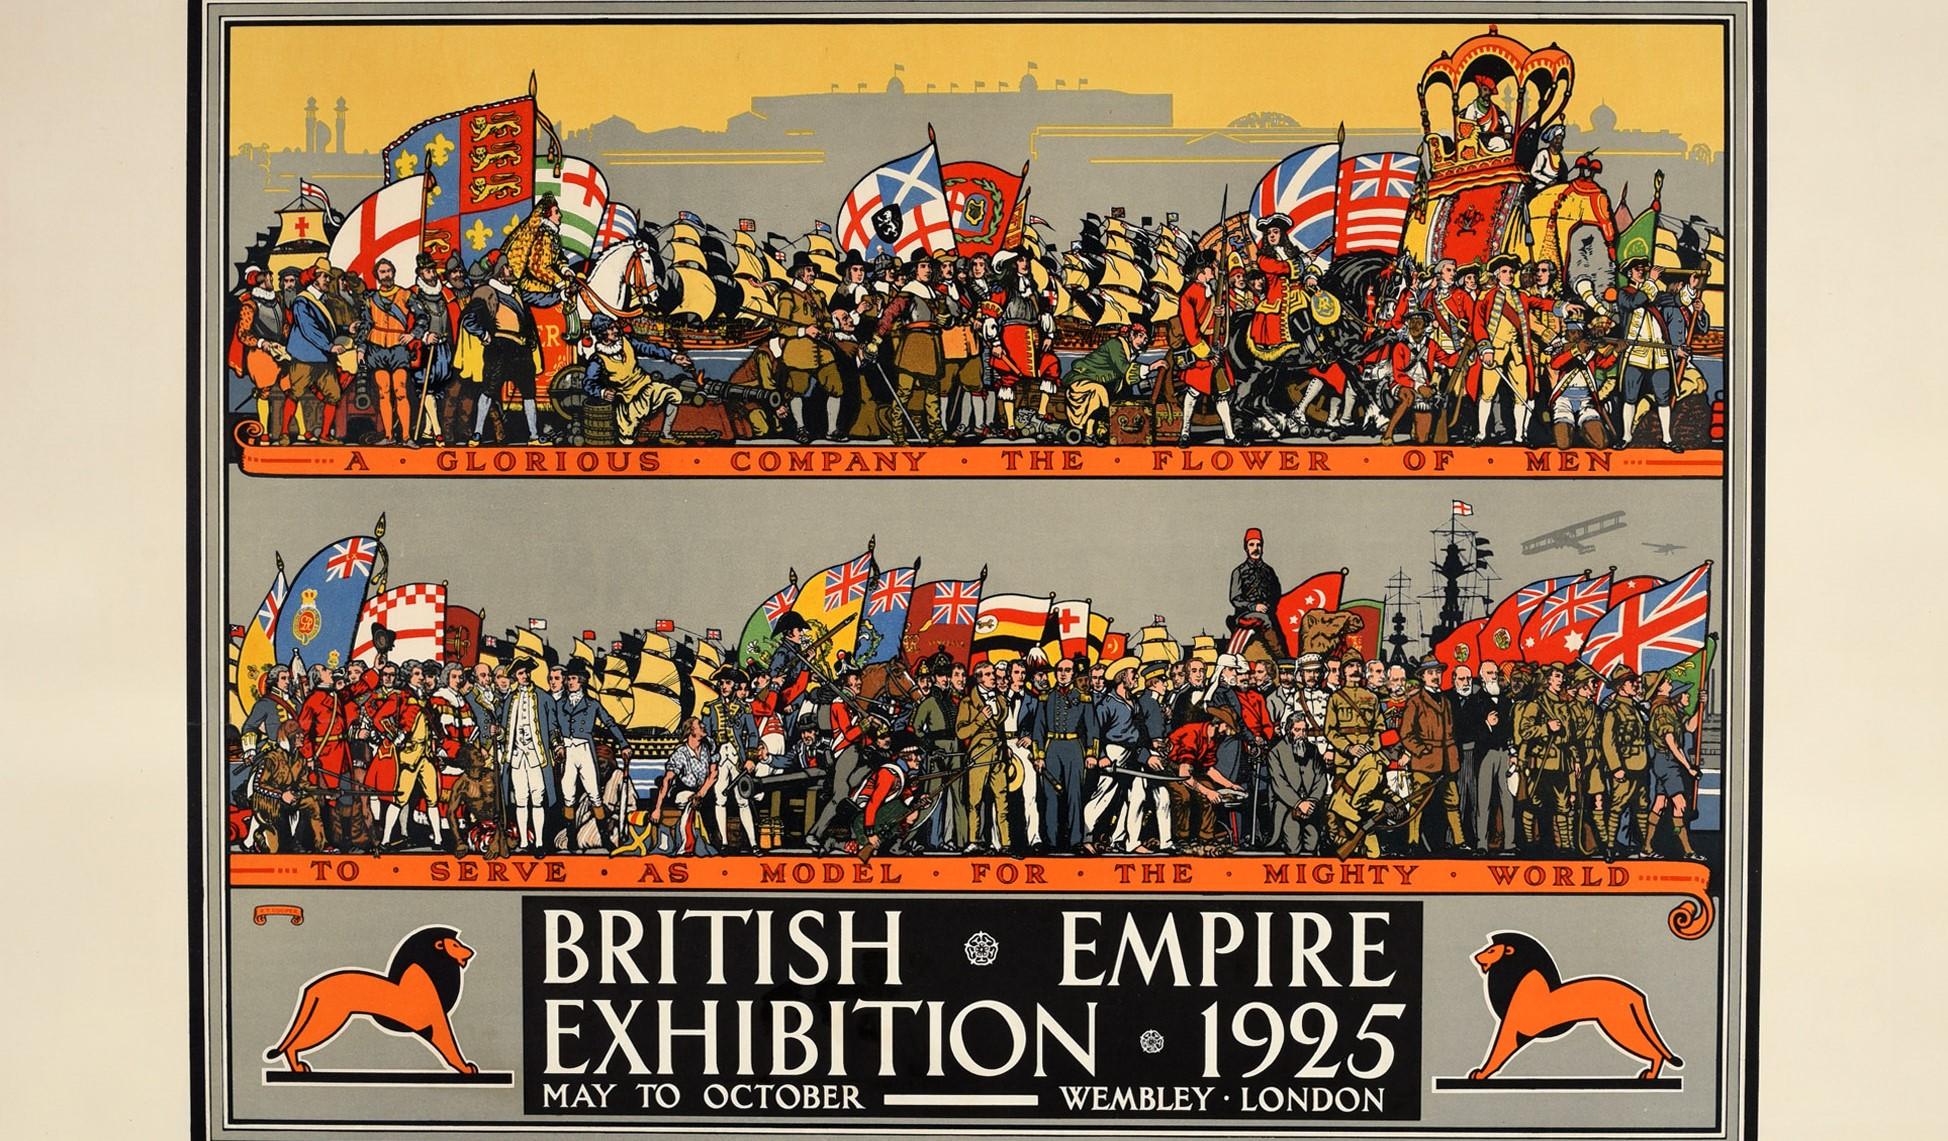 Original vintage poster advertising the British Empire Exhibition 1925 - A Glorious Company the Flower of Men to Serve as Model for the Mighty World - May to October Wembley London featuring a stunning artwork by Richard T. Cooper (1884-1957)